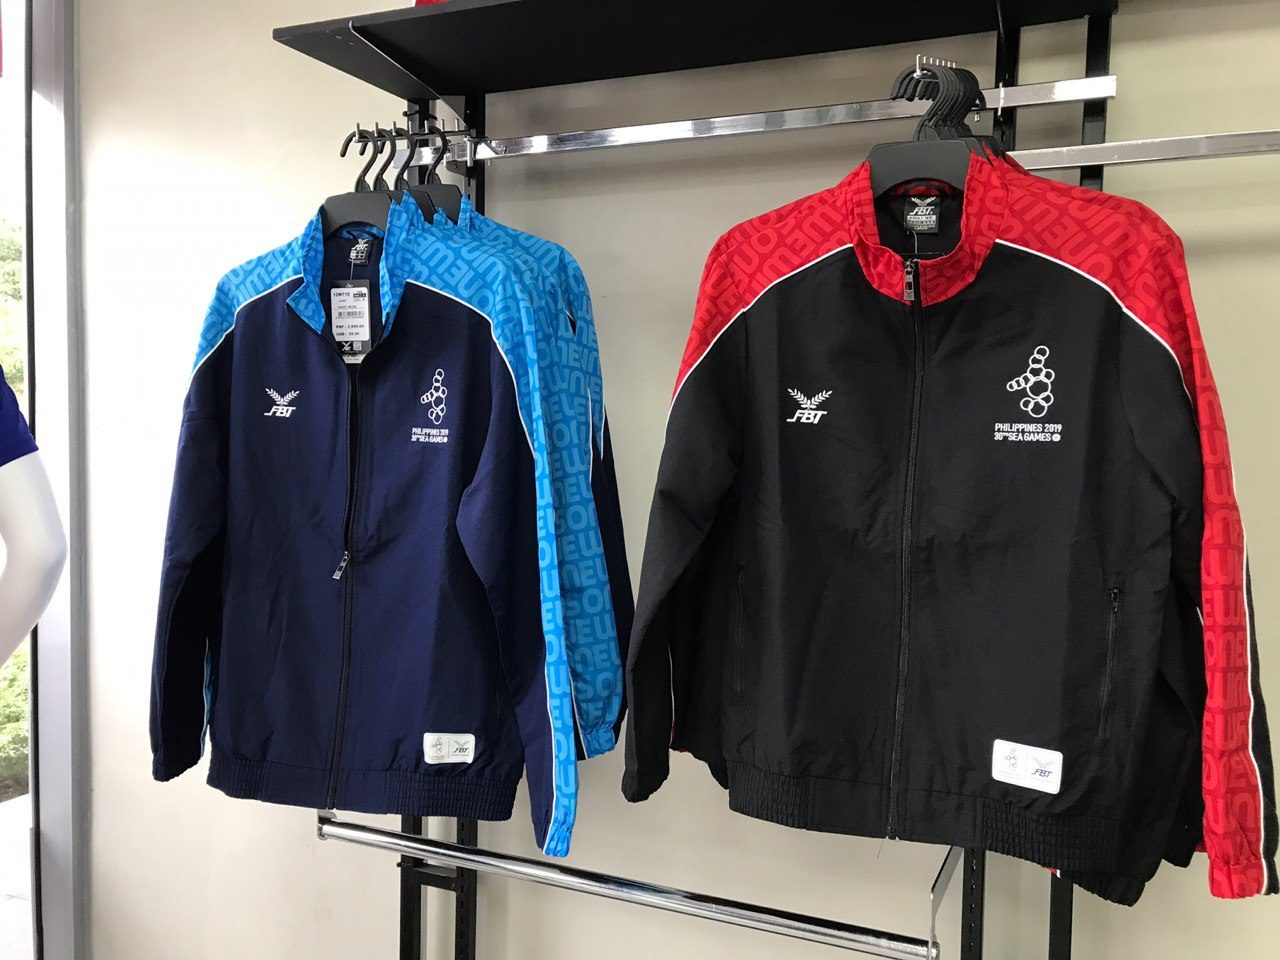 TRACK JACKETS. The FBT track jackets made of windbreaker material are among the most expensive items at P2,999 (US $59). Photo by Beatrice Go/Rappler   